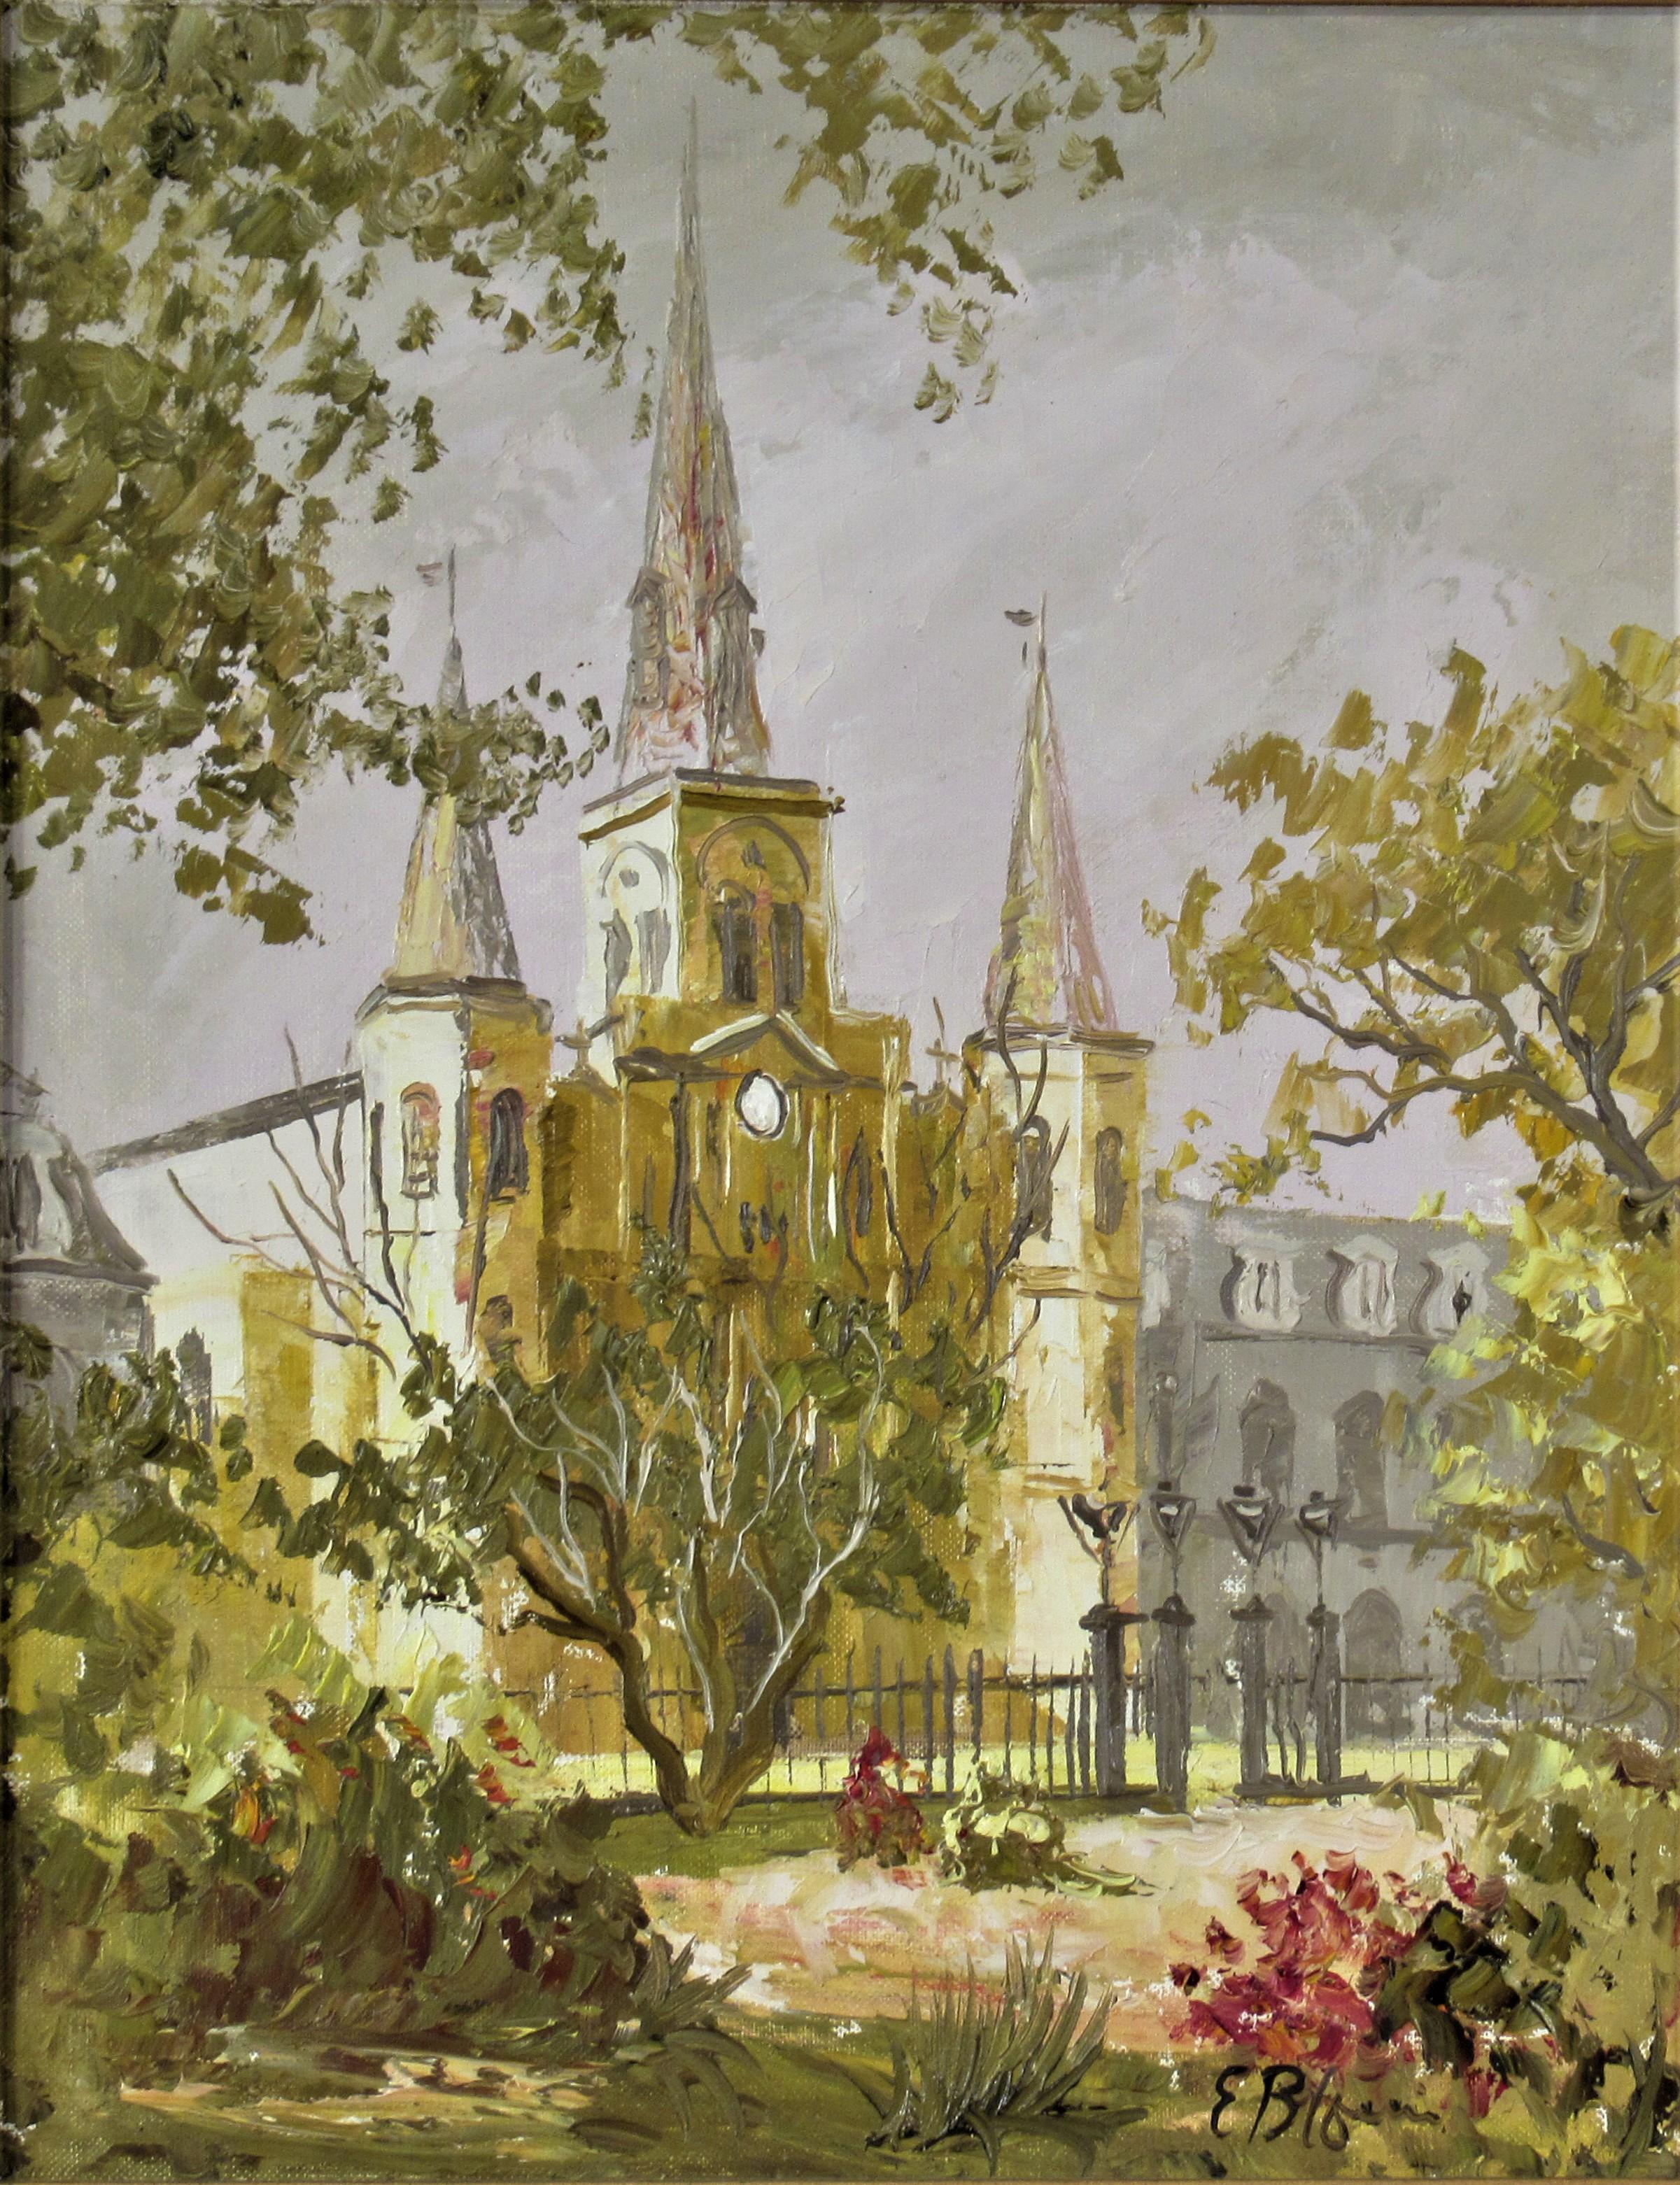 Saint Louis Cathedral, New Orleans - Painting by Edmund (Ed) Chuck Blouin